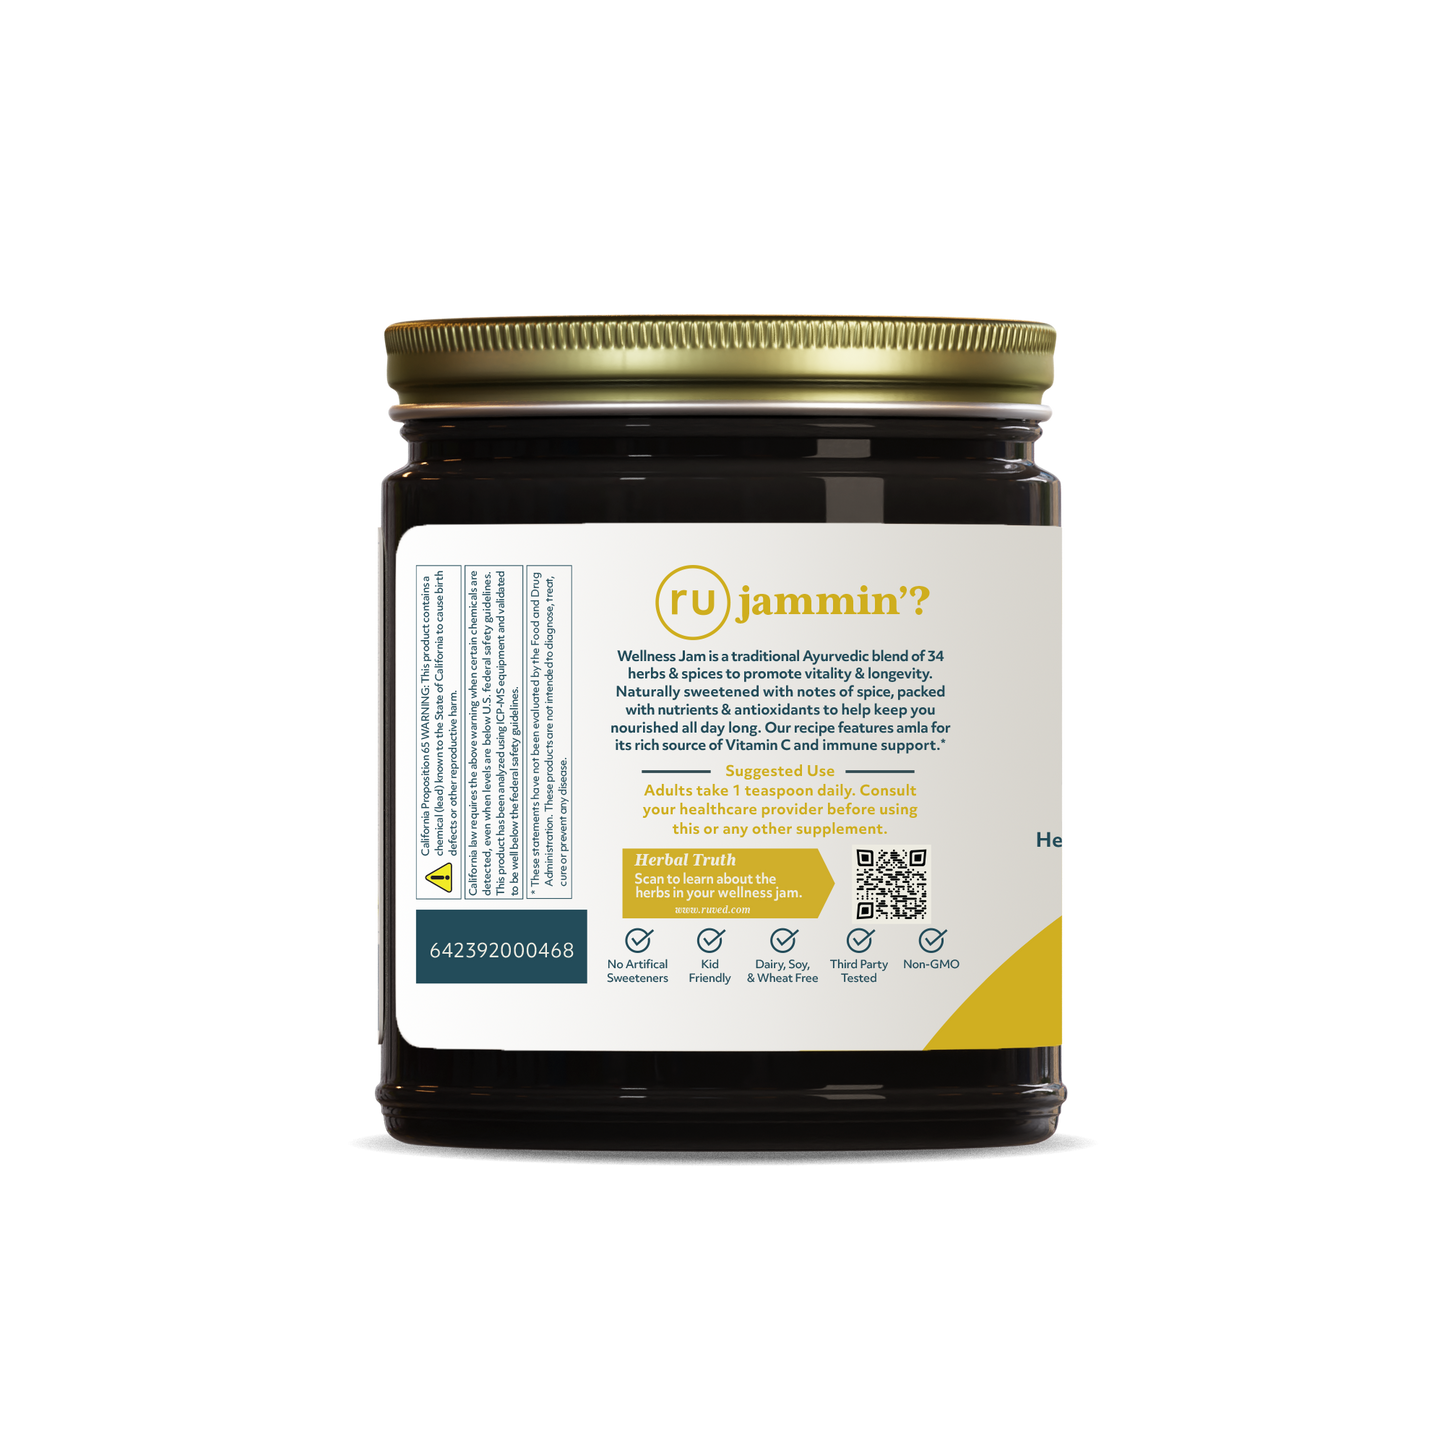 Wellness Jam Jar Description Side - Finely crafted antioxidant-packed jam for Day Nourishment - 300 gm Jar, Perfect for Immune Support + Healthy Aging with ingredients like Honey and Amla.